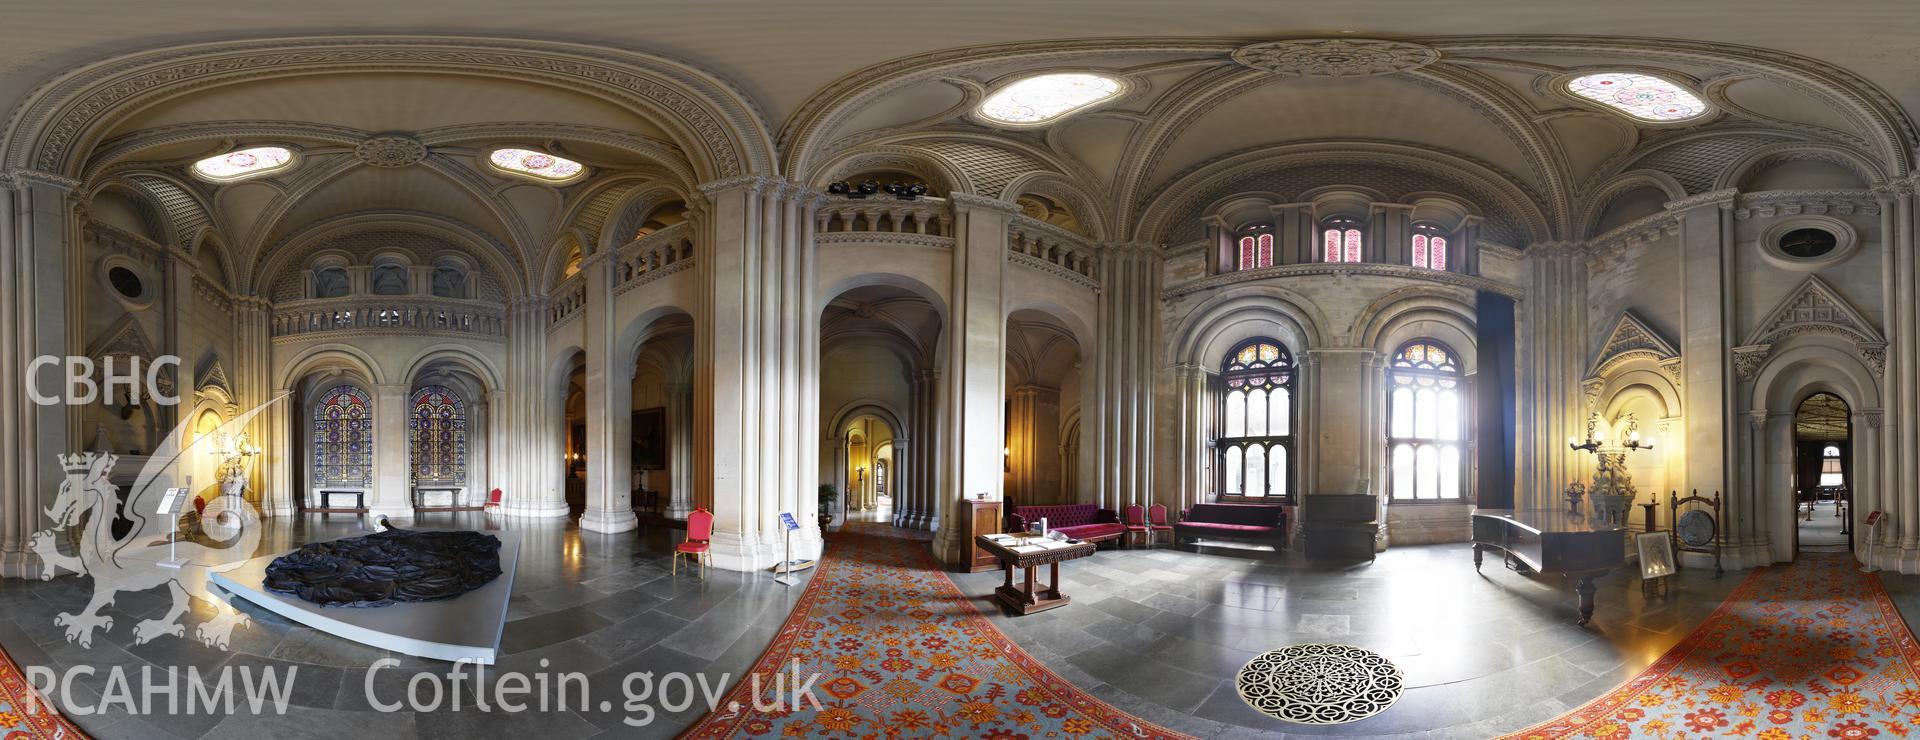 Reduced resolution Tiff of stitched images in the Hall at Penrhyn Castle produced by Susan Fielding and Rita Singer, October 2017. Produced through European Travellers to Wales project.